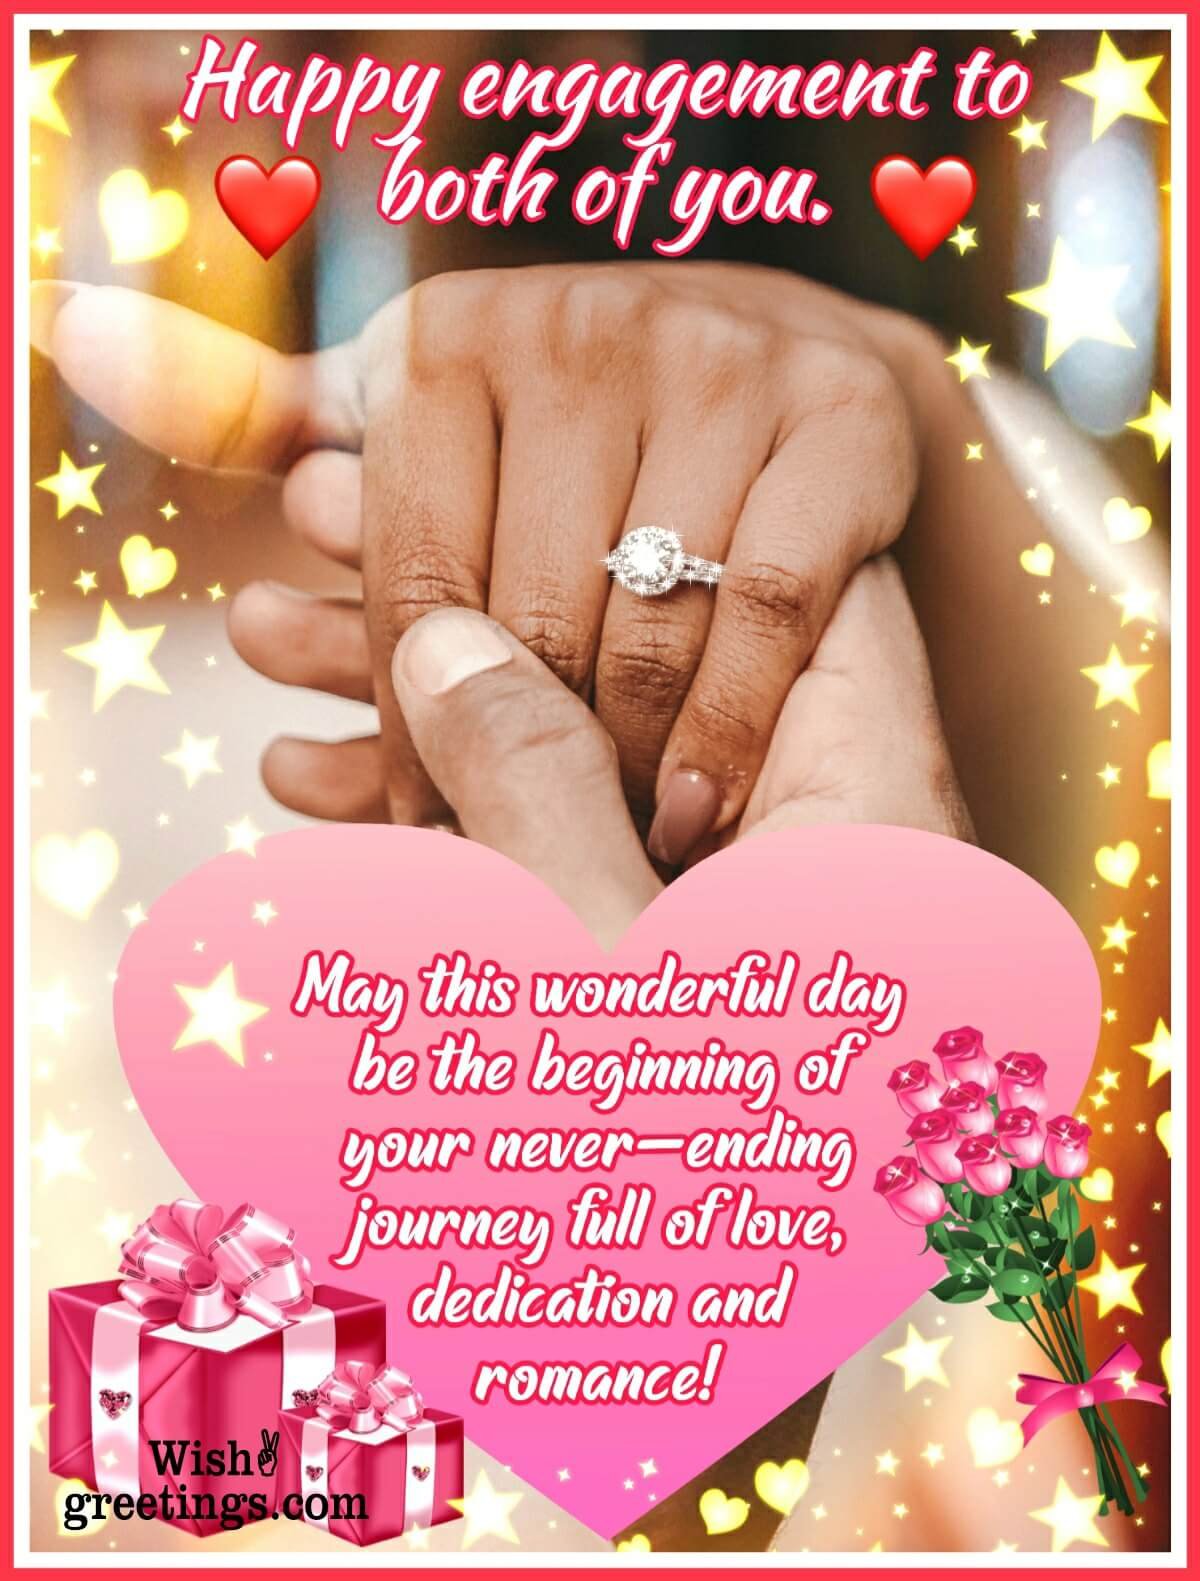 Engagement Wishes Images - Wish Greetings